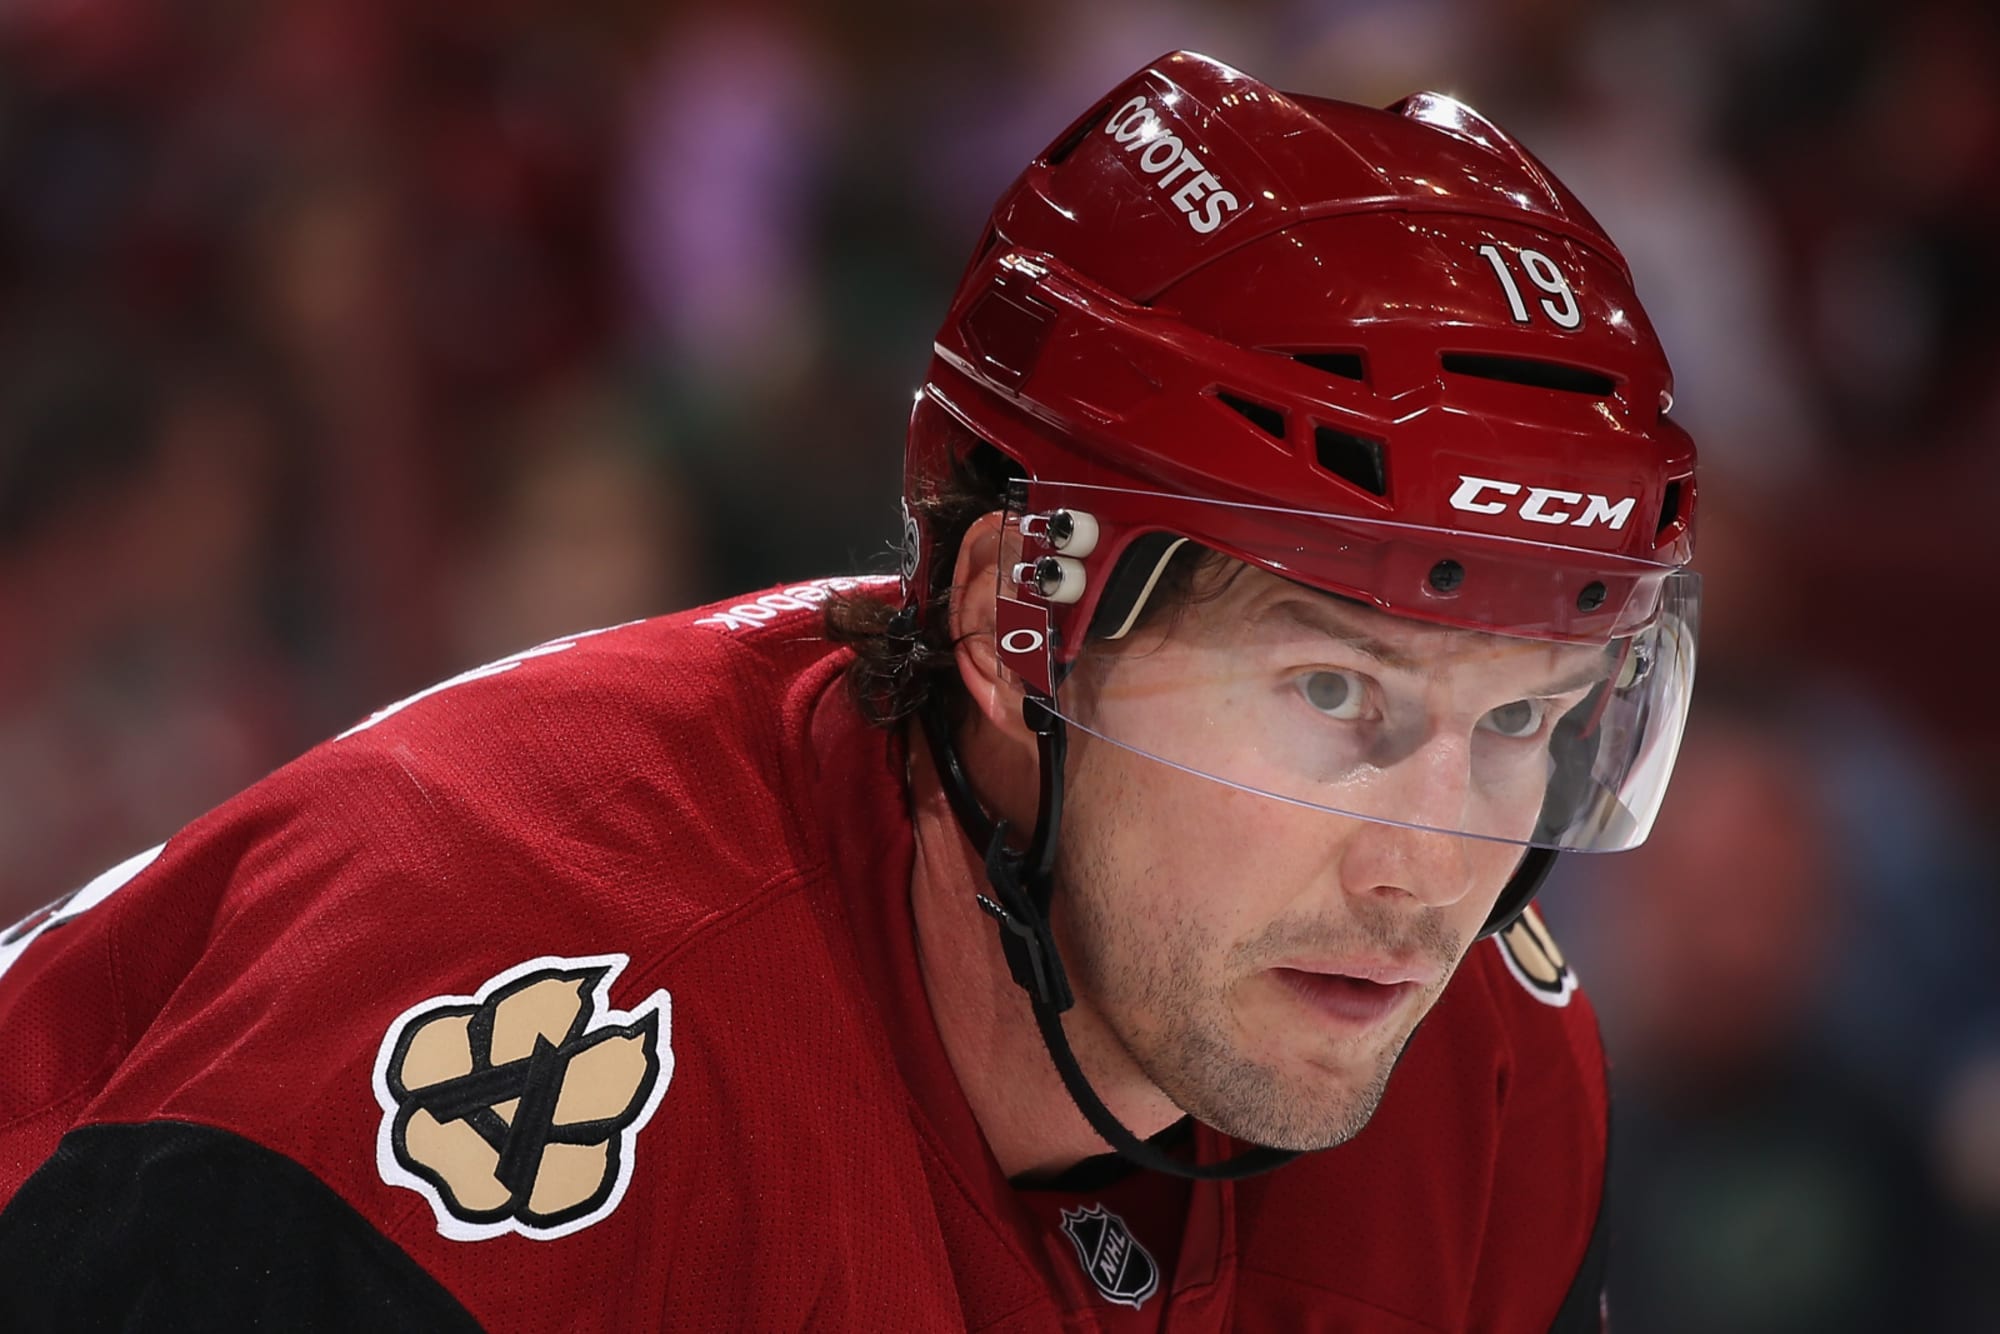 After 1,540 NHL Games, Shane Doan's Love for the Game Shines On